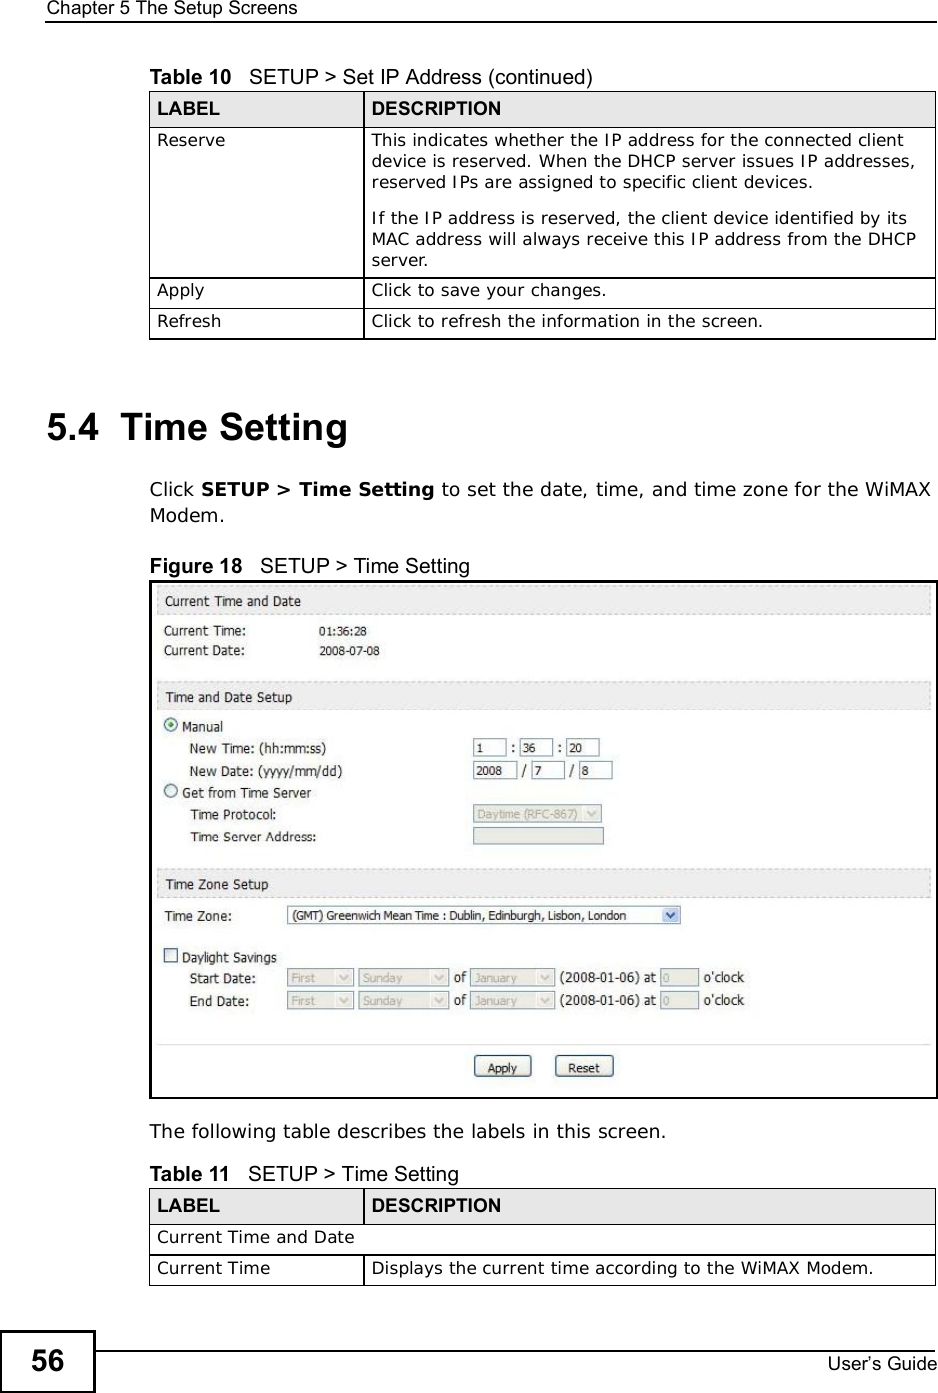 Chapter 5The Setup ScreensUser s Guide565.4  Time SettingClick SETUP &gt;Time Setting to set the date, time, and time zone for the WiMAX Modem.Figure 18   SETUP &gt; Time SettingThe following table describes the labels in this screen. Reserve This indicates whether the IP address for the connected client device is reserved. When the DHCP server issues IP addresses, reserved IPs are assigned to specific client devices.If the IP address is reserved, the client device identified by its MAC address will always receive this IP address from the DHCP server.Apply Click to save your changes.Refresh Click to refresh the information in the screen.Table 10   SETUP &gt; Set IP Address (continued)LABEL DESCRIPTIONTable 11   SETUP &gt; Time SettingLABEL DESCRIPTIONCurrent Time and DateCurrent TimeDisplays the current time according to the WiMAX Modem.